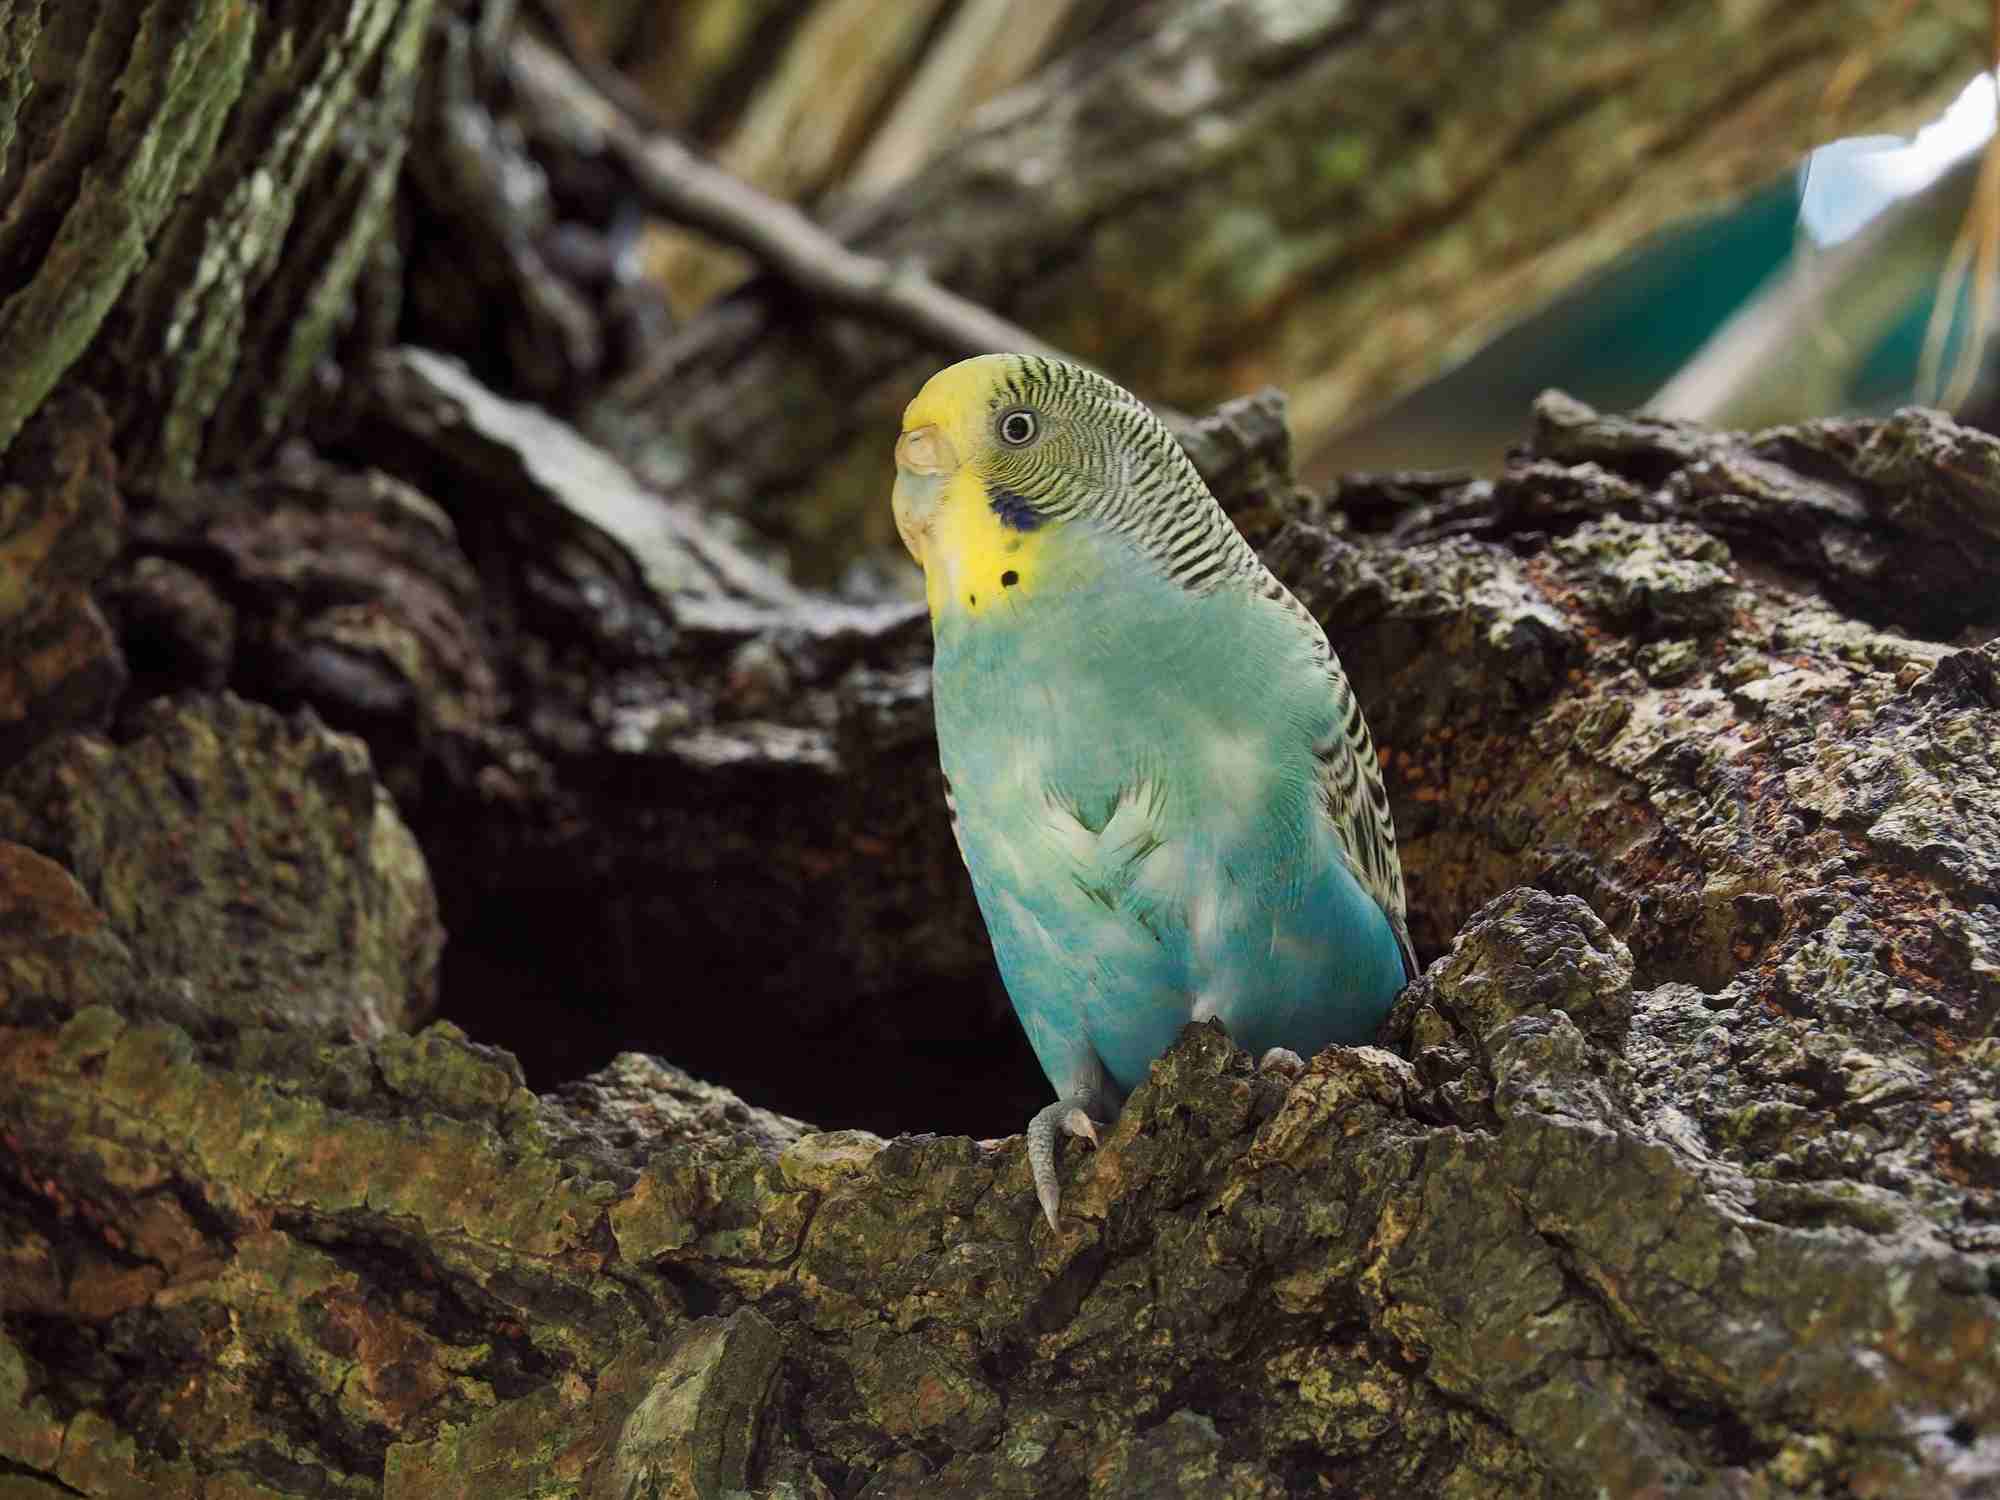 Budgerigar perched on a tree stump